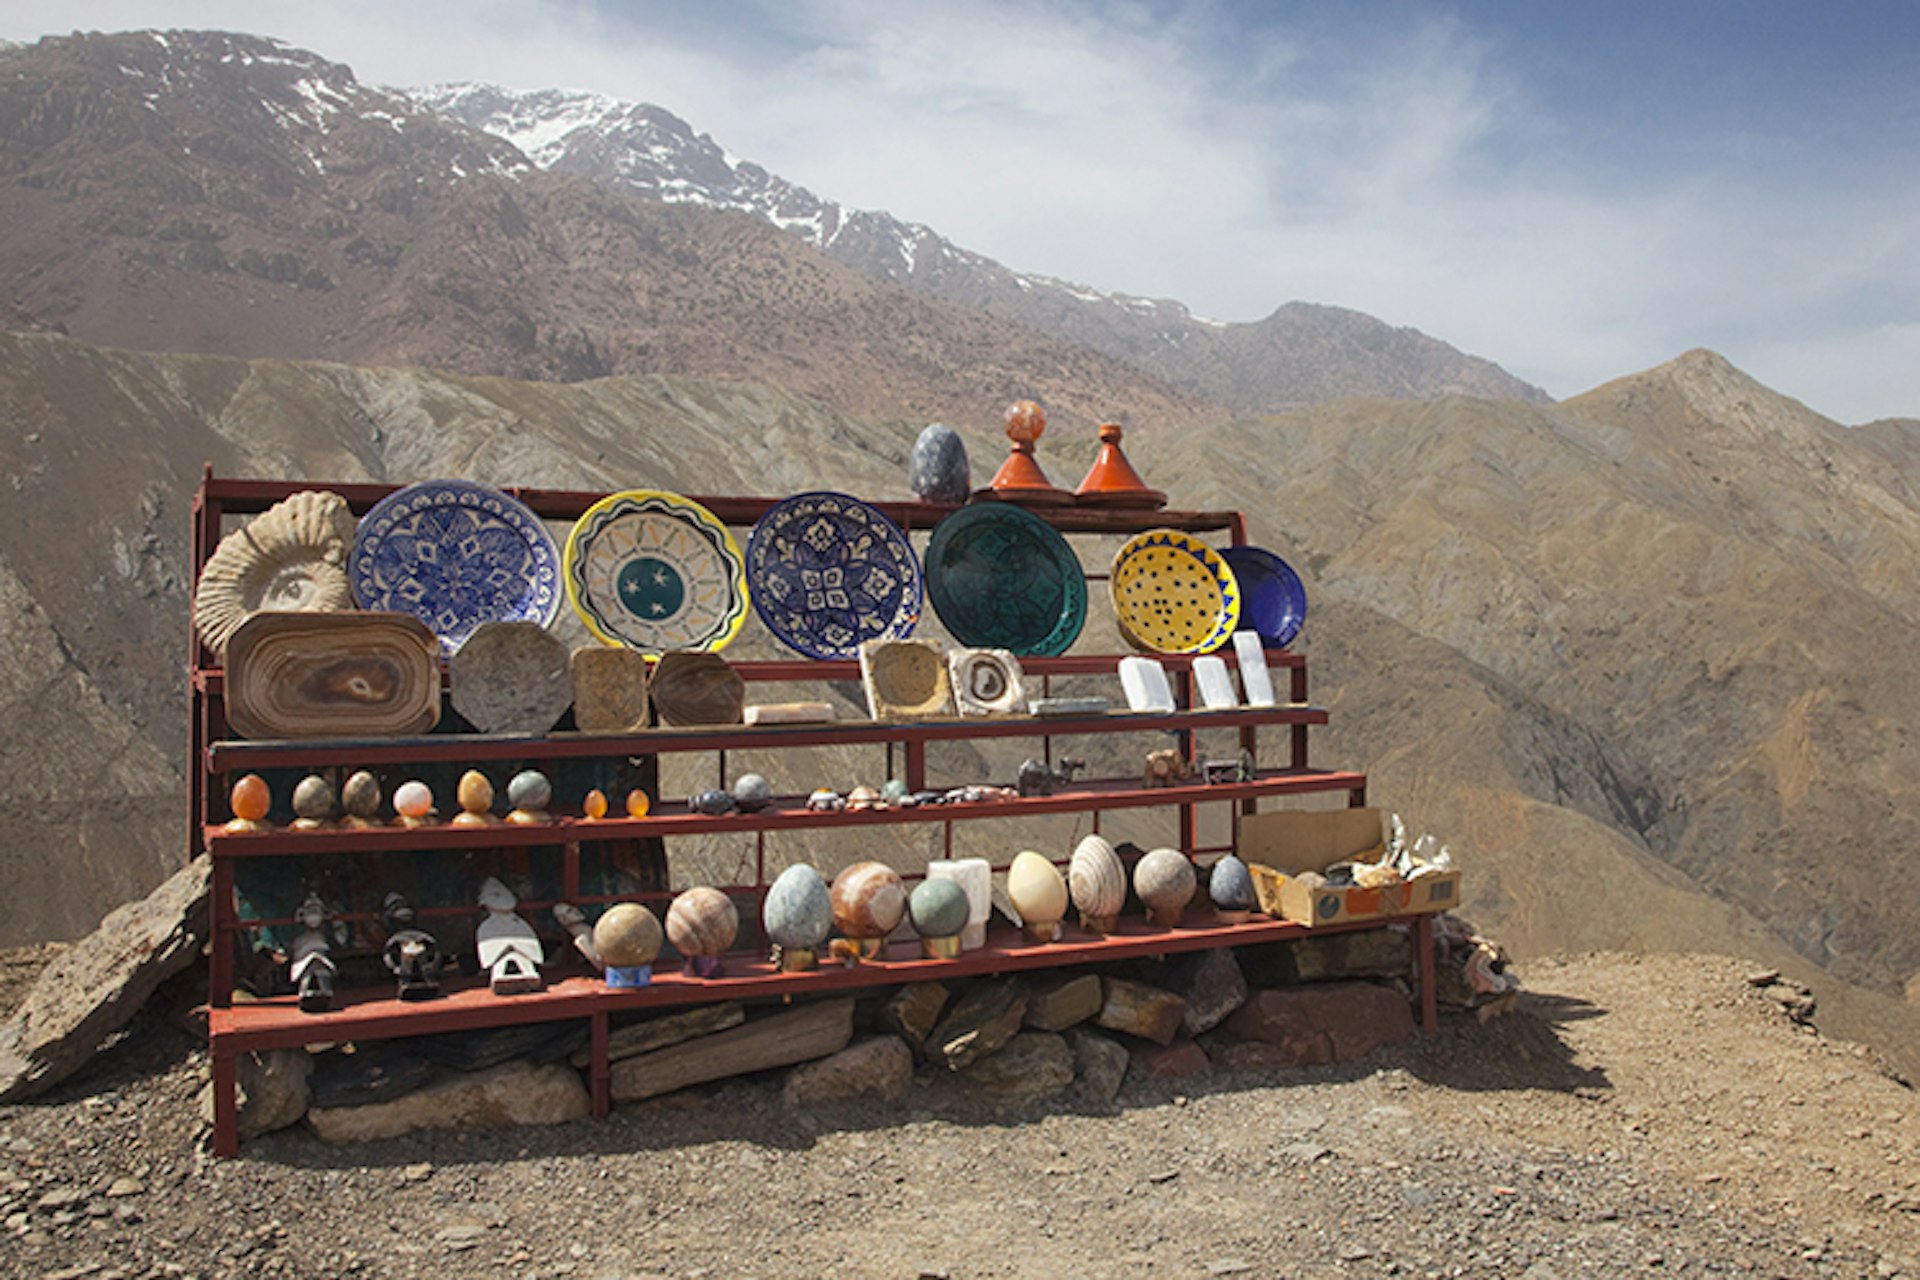 Souvenirs in the Himalaya - you can pick up mementos of your travels almost anywhere. Image by Elisabeth Pollaert Smith / Photographer's Choice / Getty Images